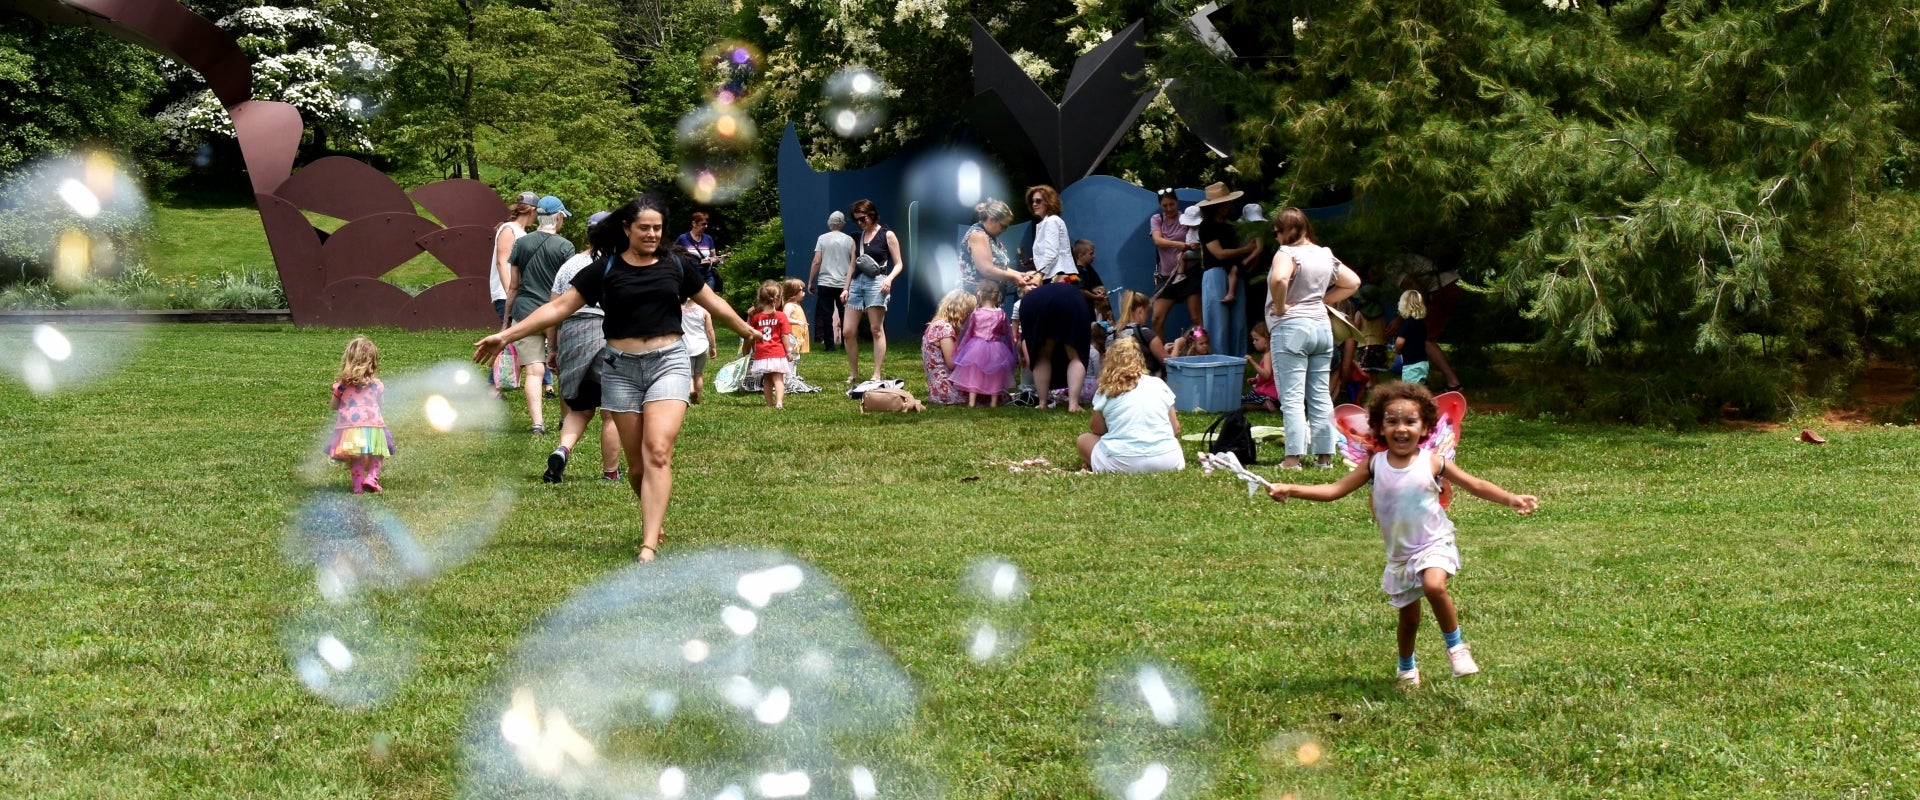 A group of people gathered on a lawn filled with bubbles as a mother and daughter run smiling. 